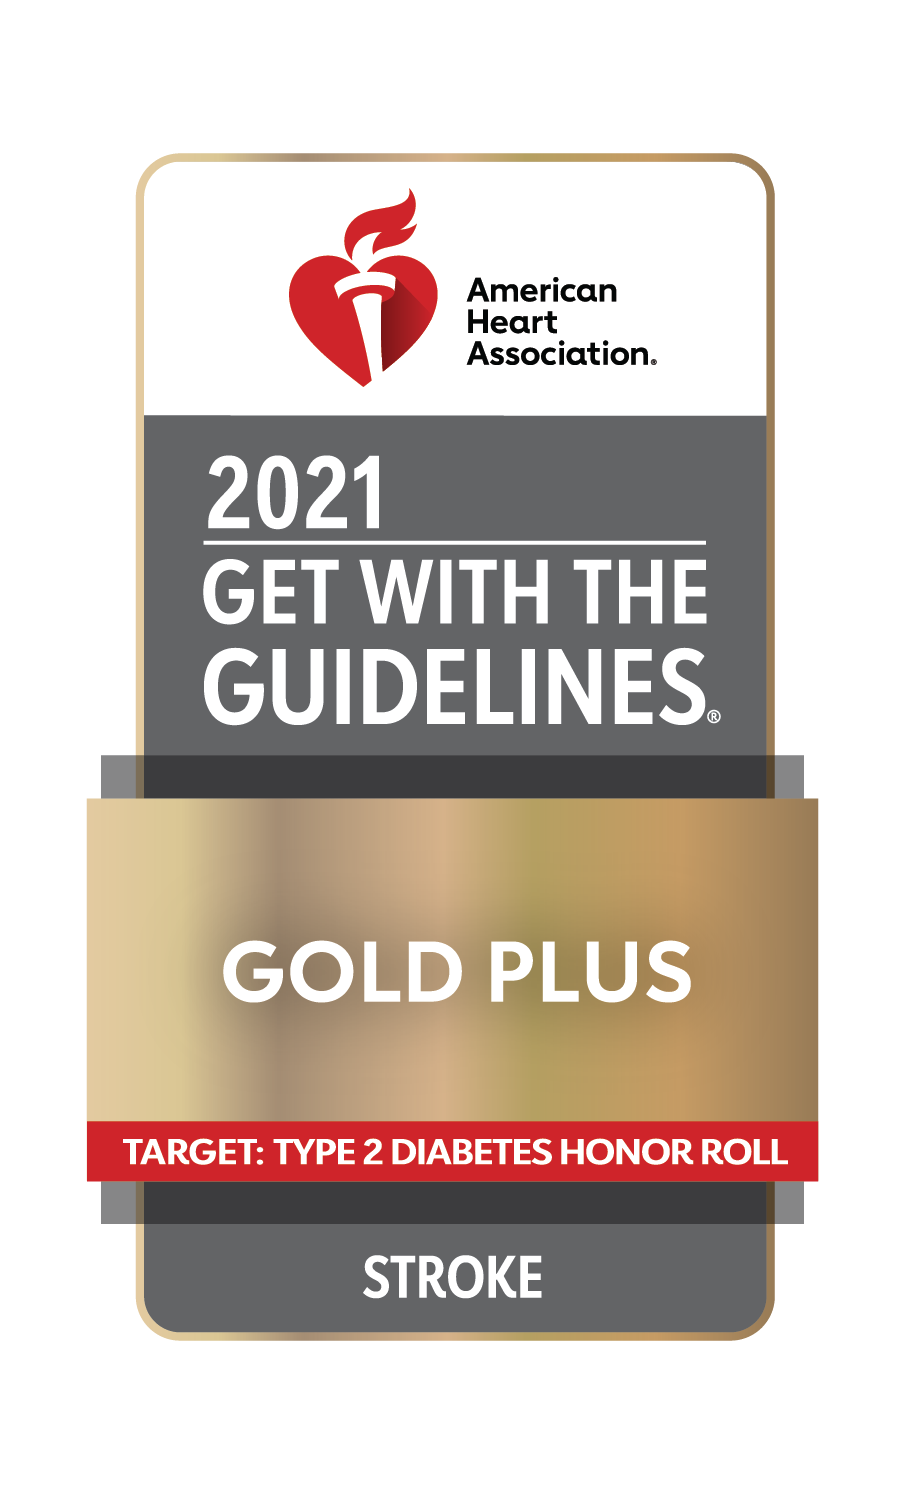 Get With the Guidelines Gold Plus Stroke Award